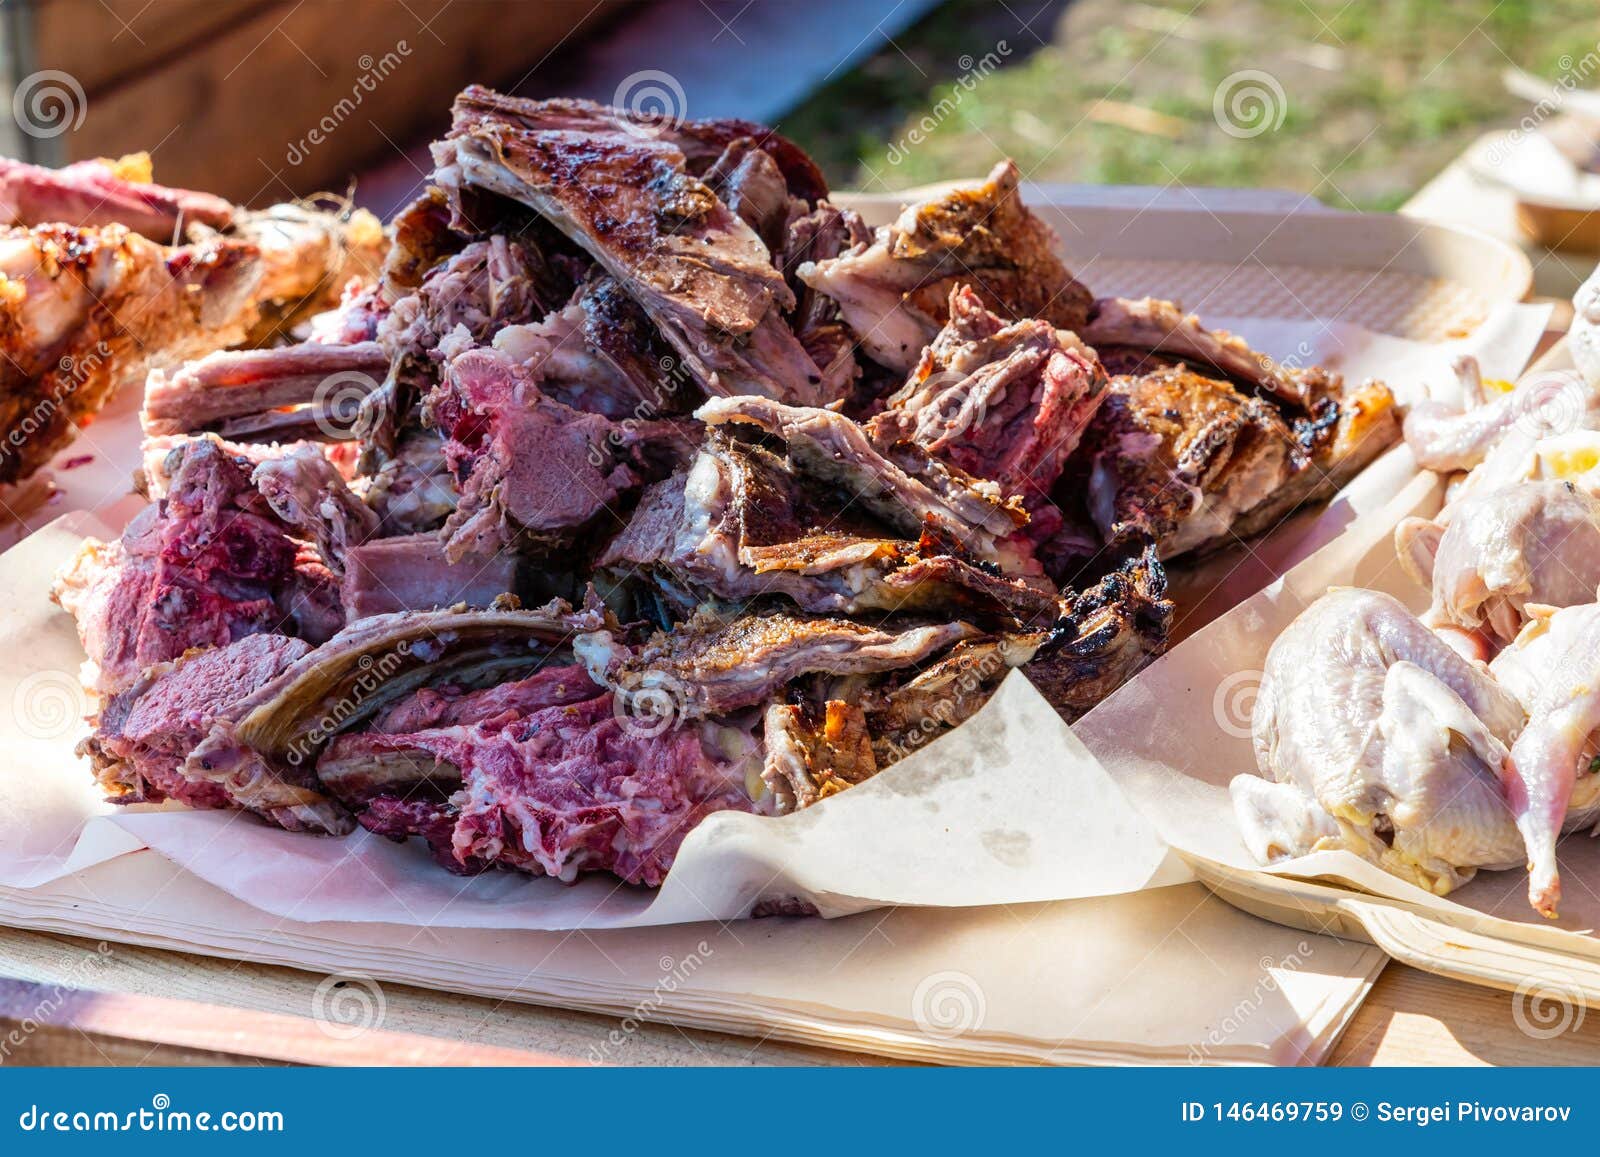 Ribs Meat Kenguryatina Dark Delicious Fresh Spicy Exotic Dishes of a Summer  Barbecue Picnic, Lots of Meat Men`s Party Stock Image - Image of bone,  chop: 146469759